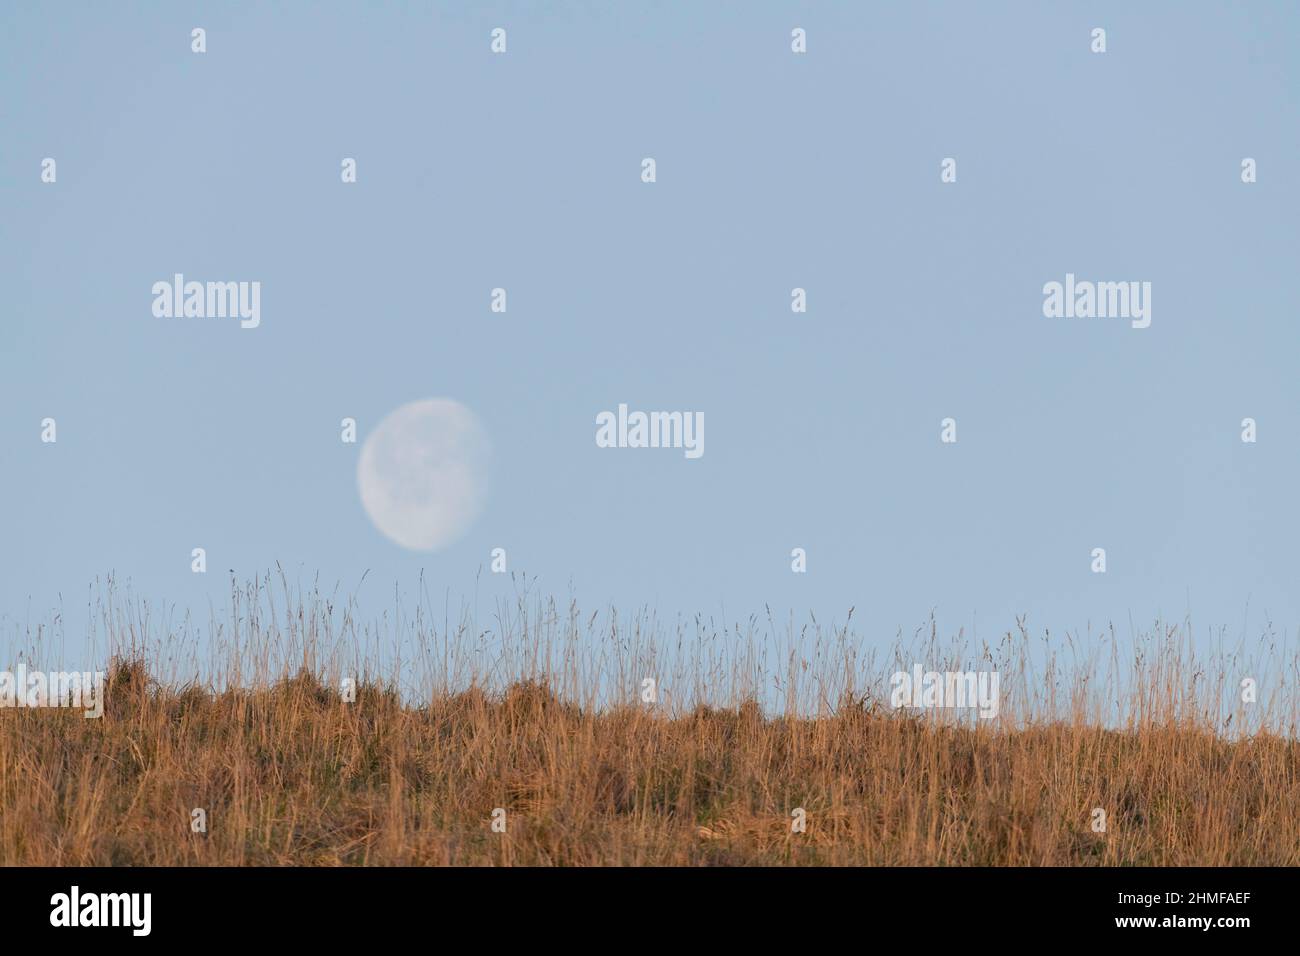 A Nearly Full Moon (Waning, 90%) Seen Low Above Grassland in a Clear Sky at Daybreak, with Grasses on the Hillside Forming the Horizon Stock Photo